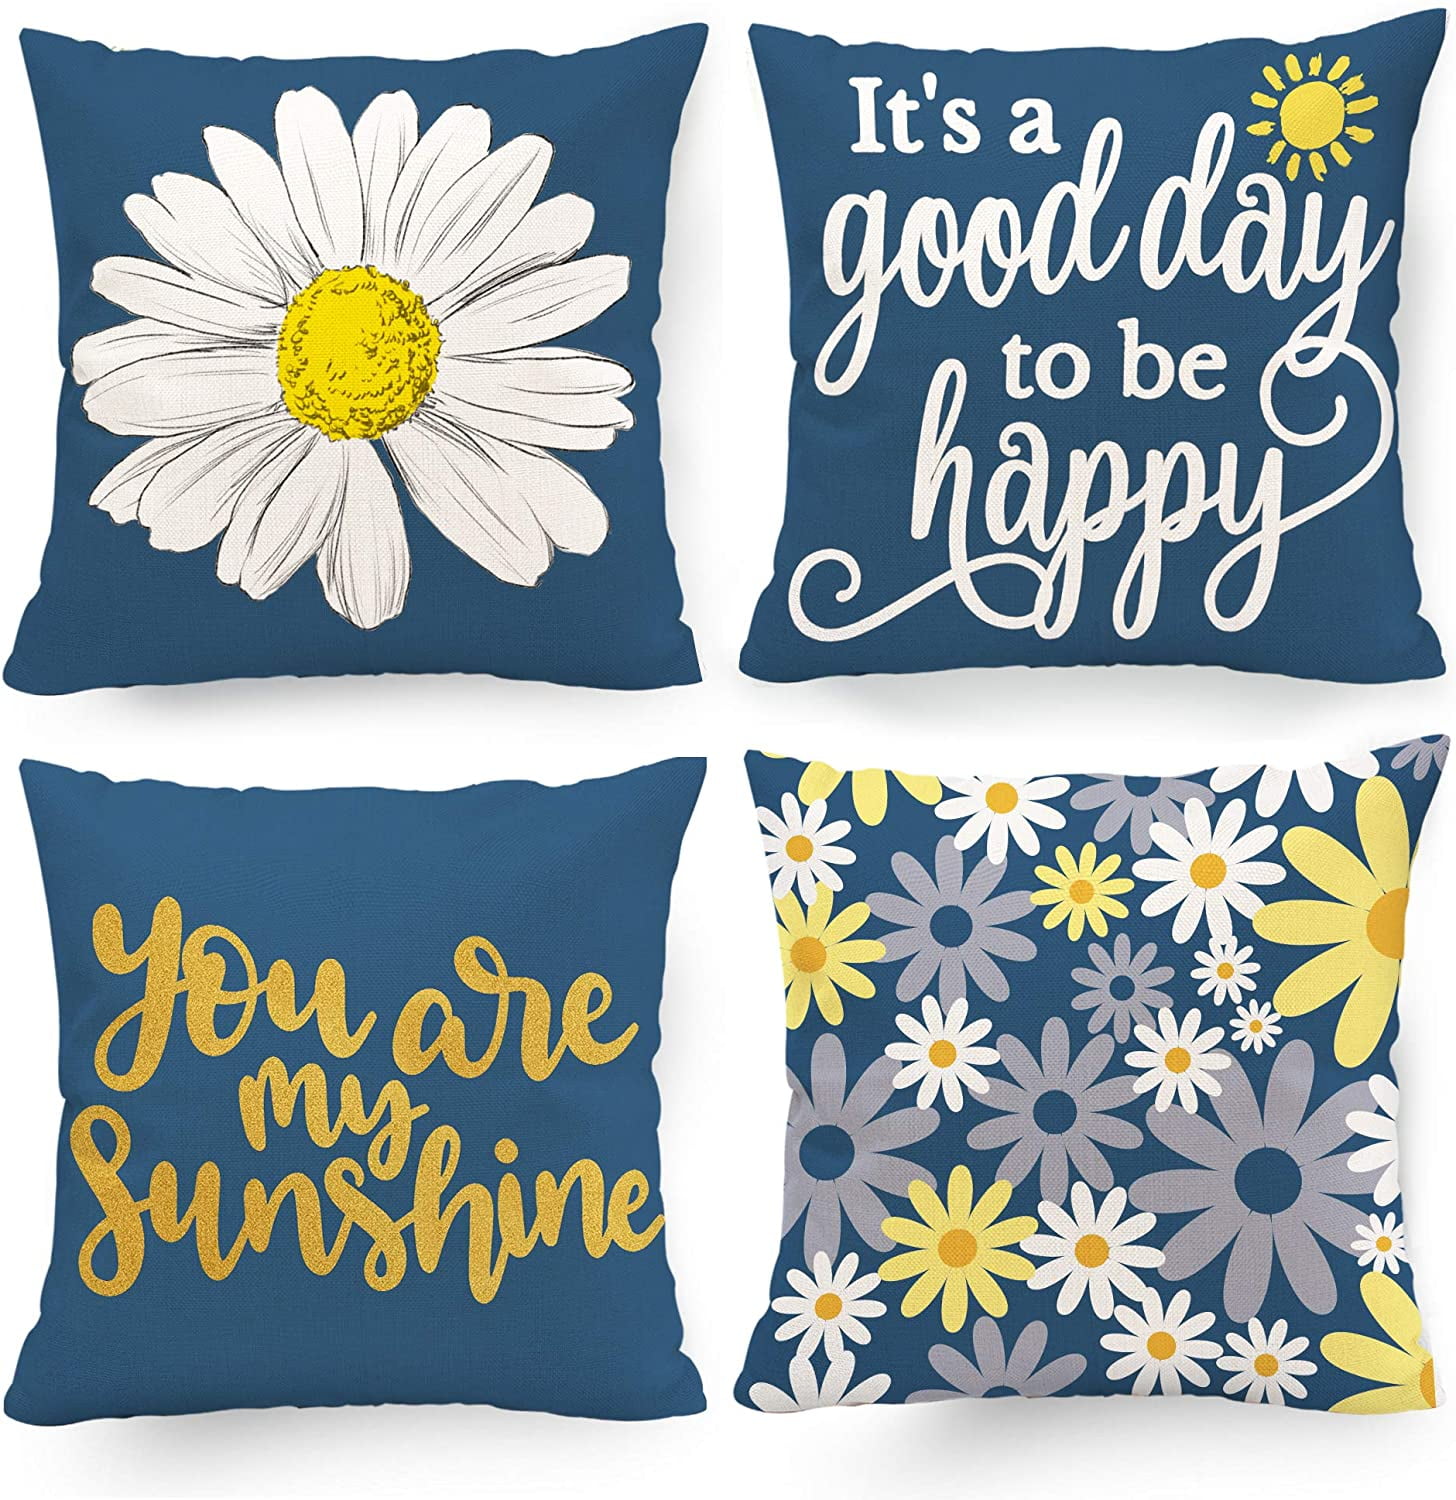 Personalized Cushion Cover Handmade in the USA,Pillow Covers 16x16 You Are My Sunshine Pillow Cover